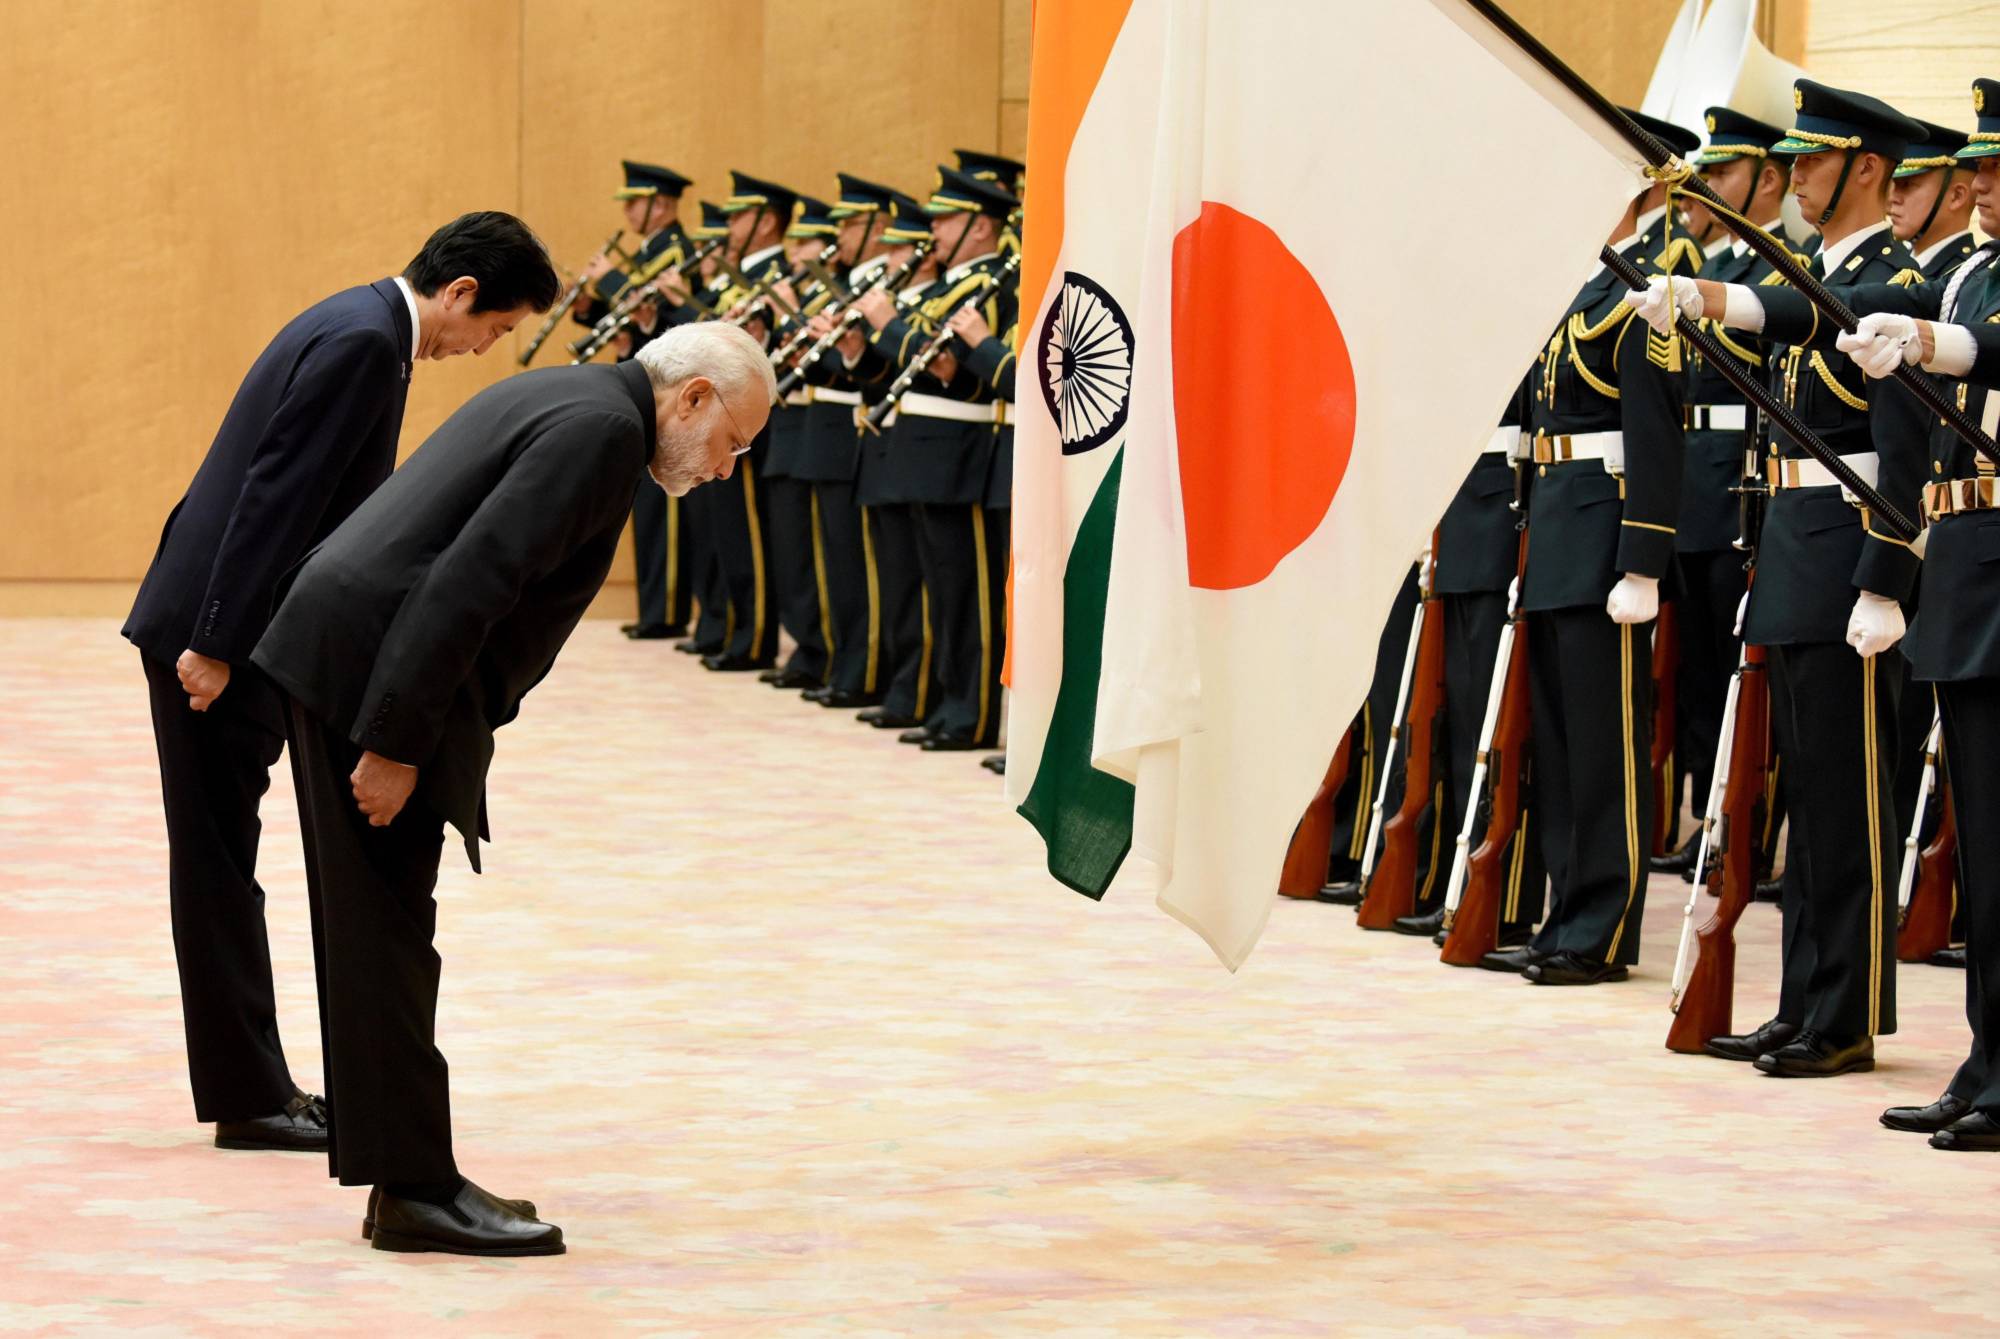 Prime Minister Shinzo Abe, seen here reviewing an honor guard in Tokyo with Indian Prime Minister Narendra Modi in November 2016, has been seeking to build a consensus to counter an increasingly aggressive China. | BLOOMBERG